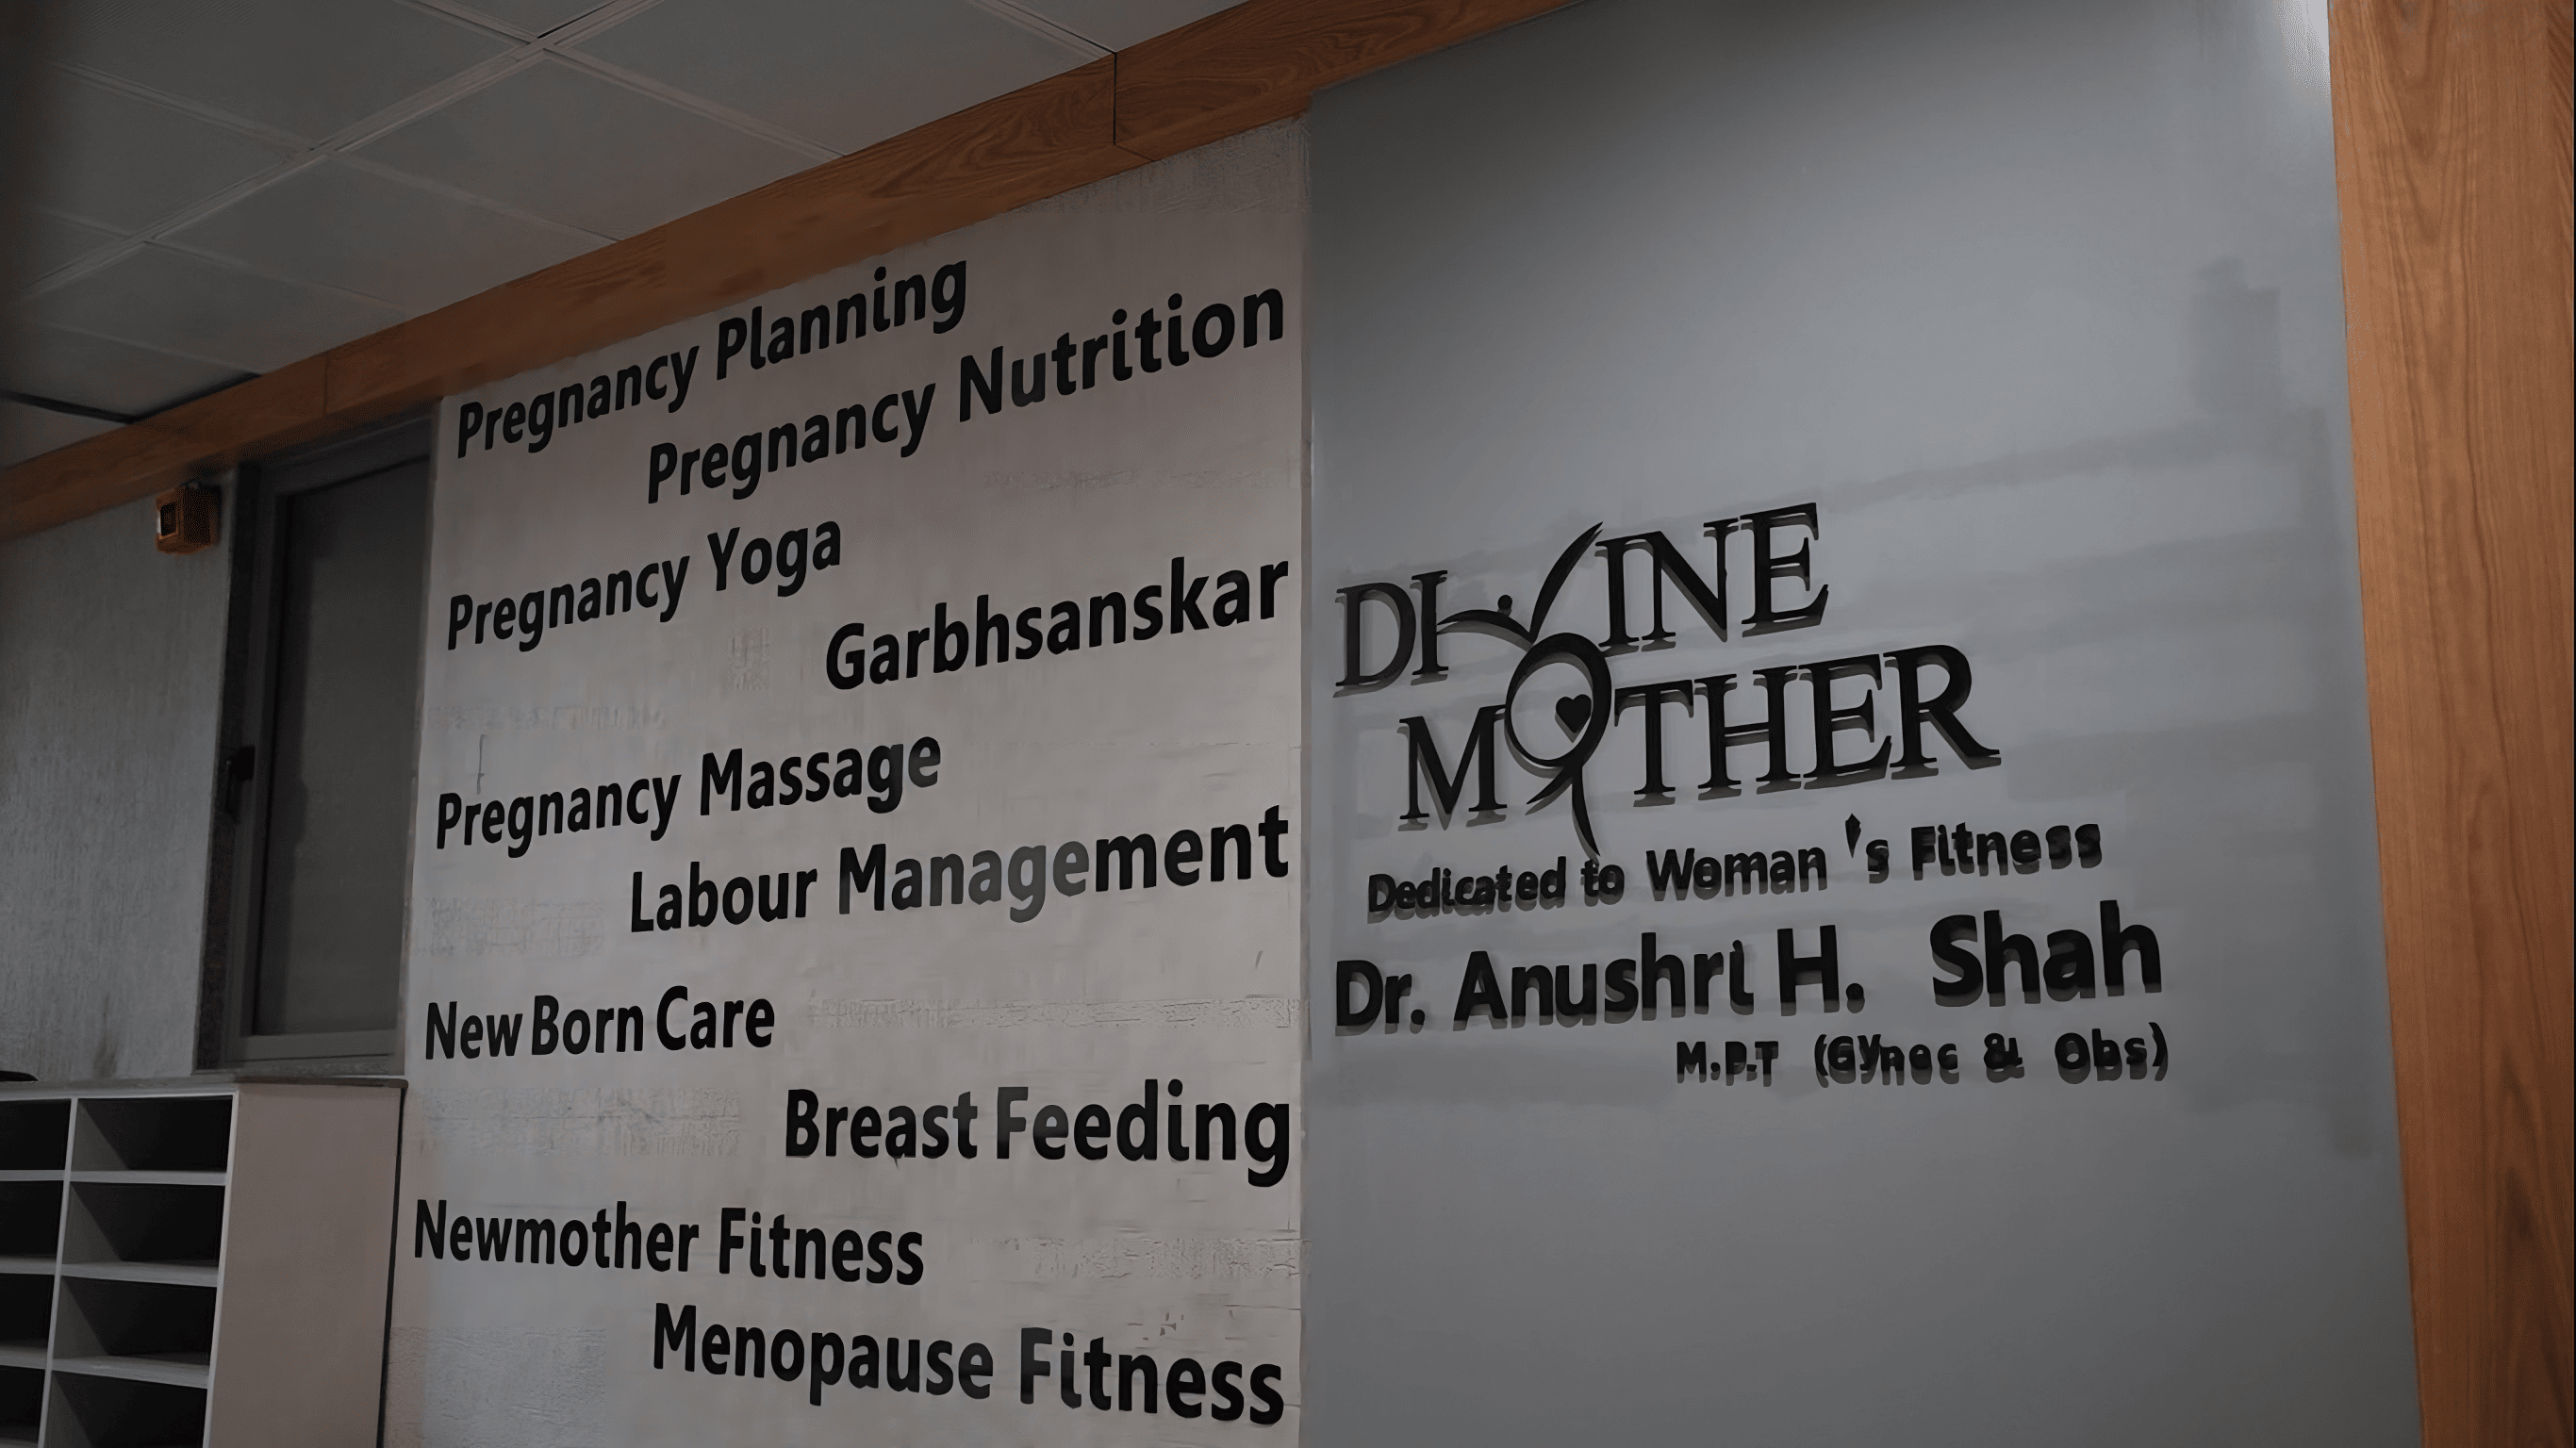 Divine Mother clinic